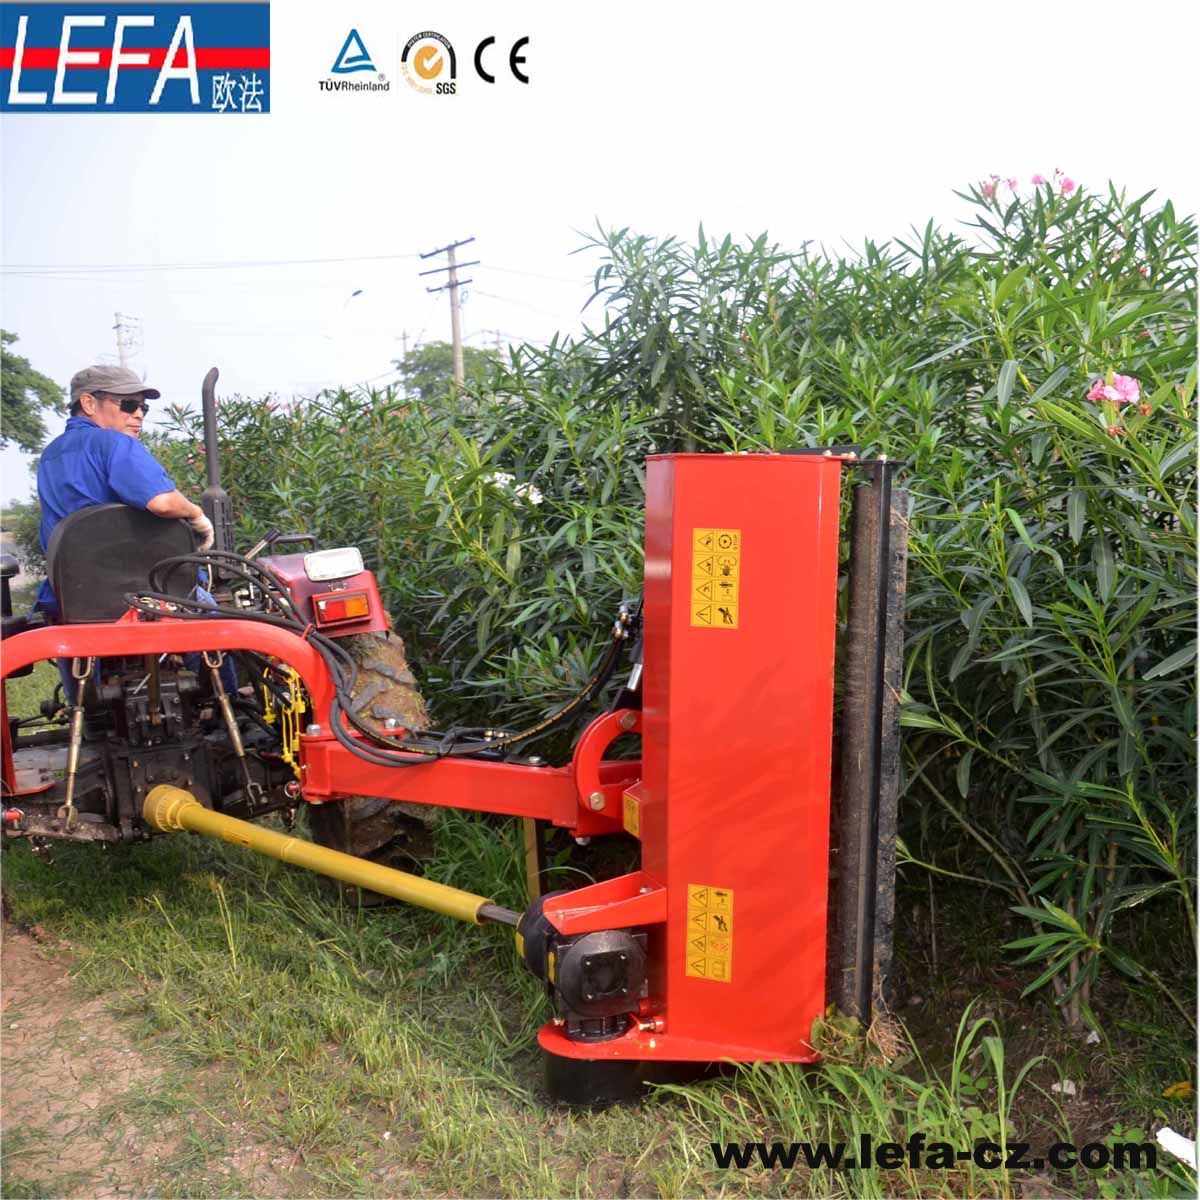 New Model Tractor Portable Weed Side Hydralic Flail Mower